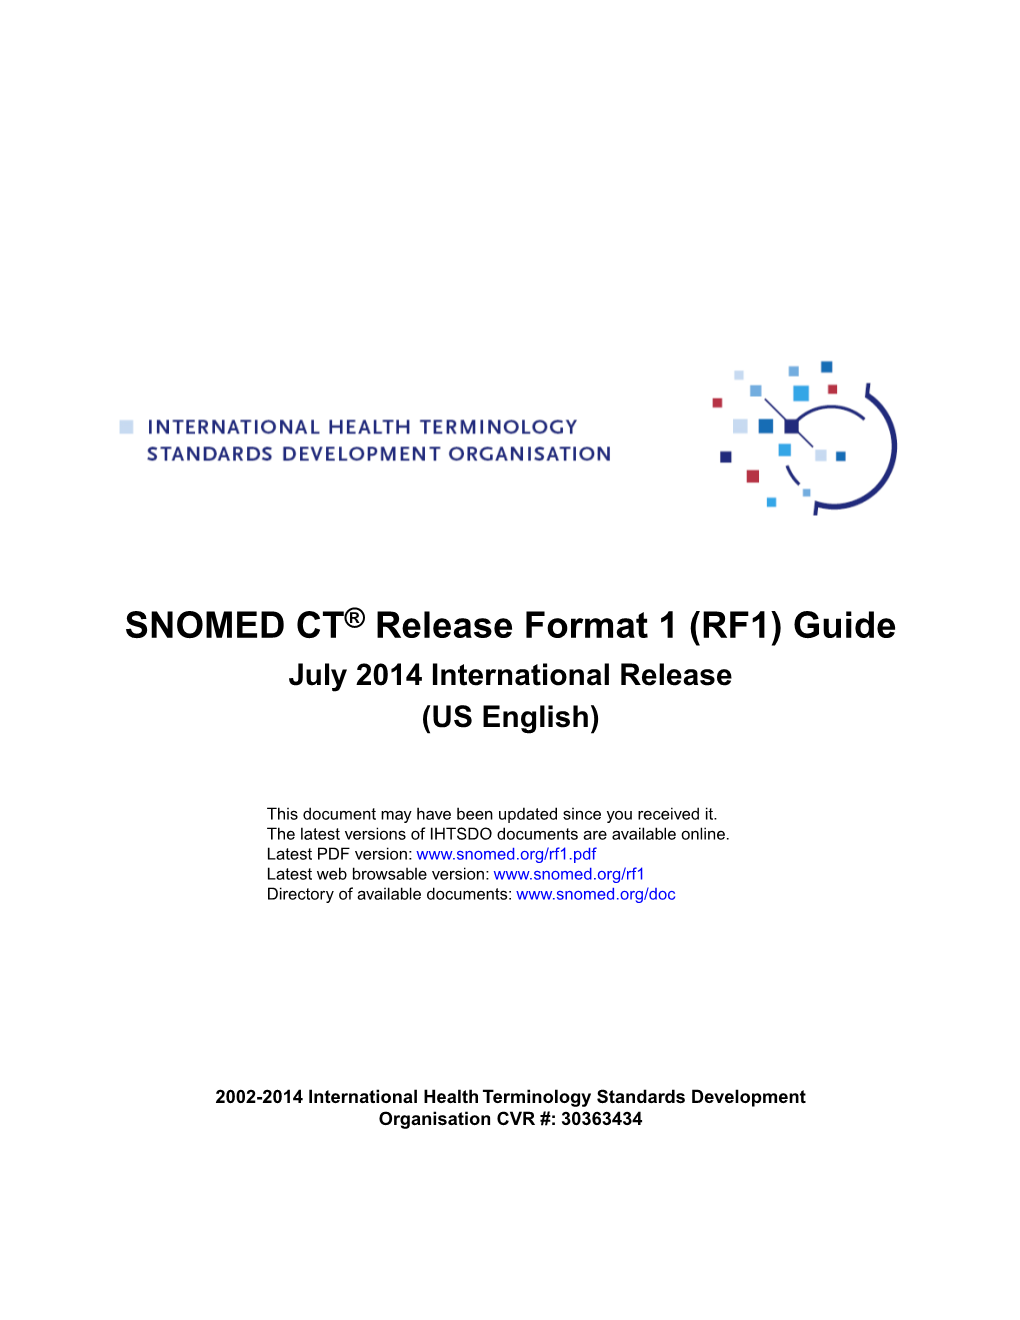 SNOMED CT® Release Format 1 (RF1) Guide July 2014 International Release (US English)